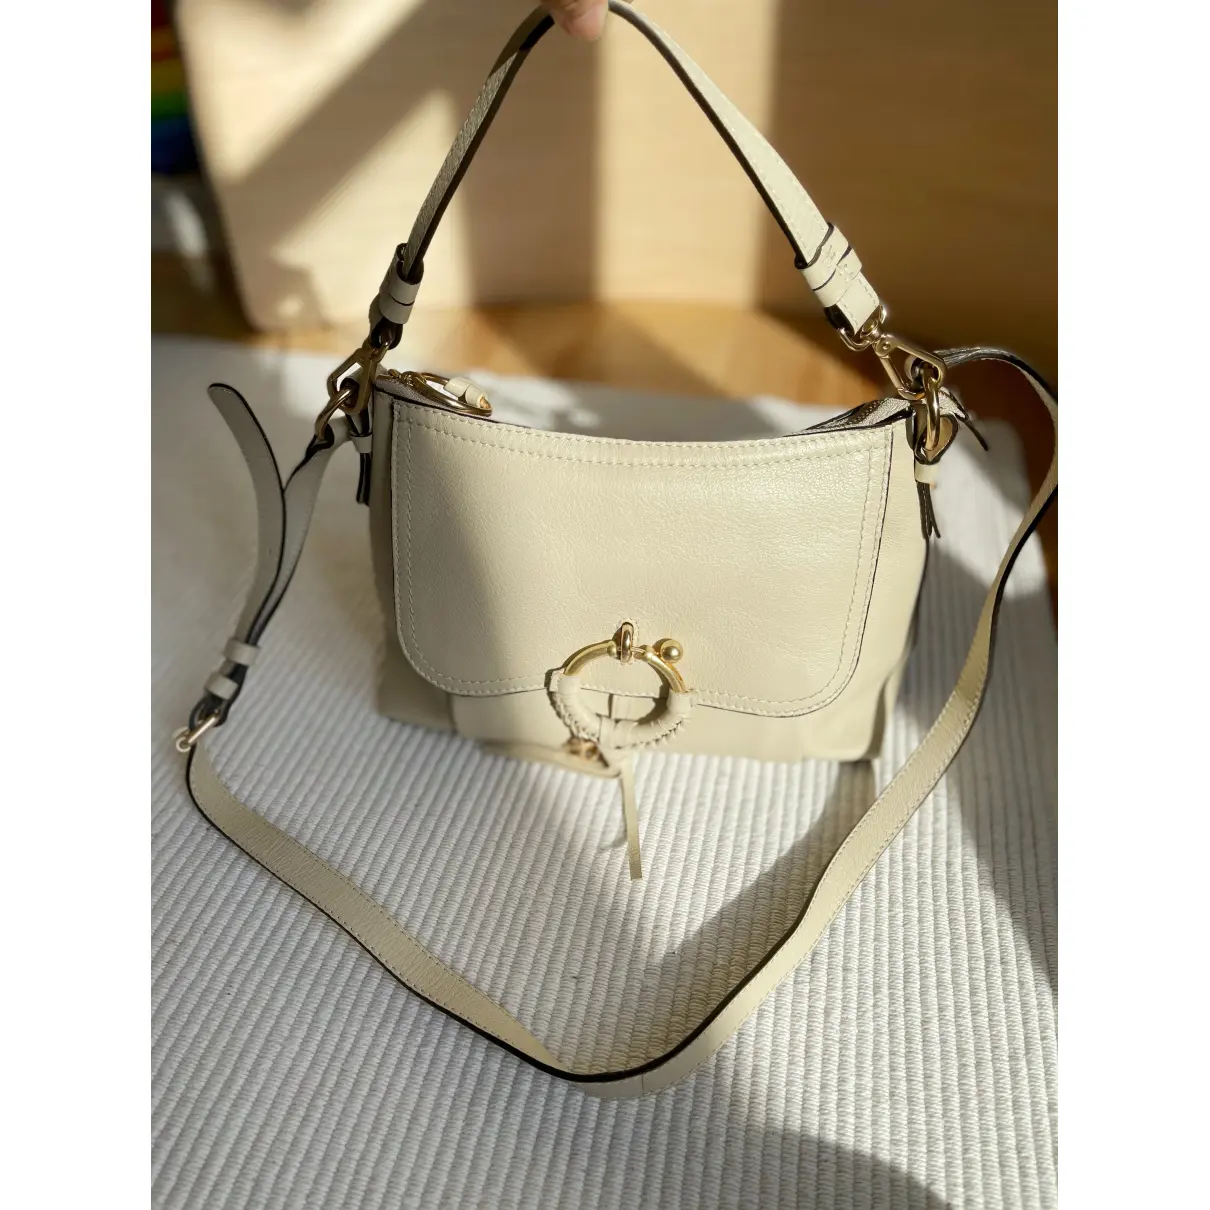 Buy See by Chloé Leather handbag online